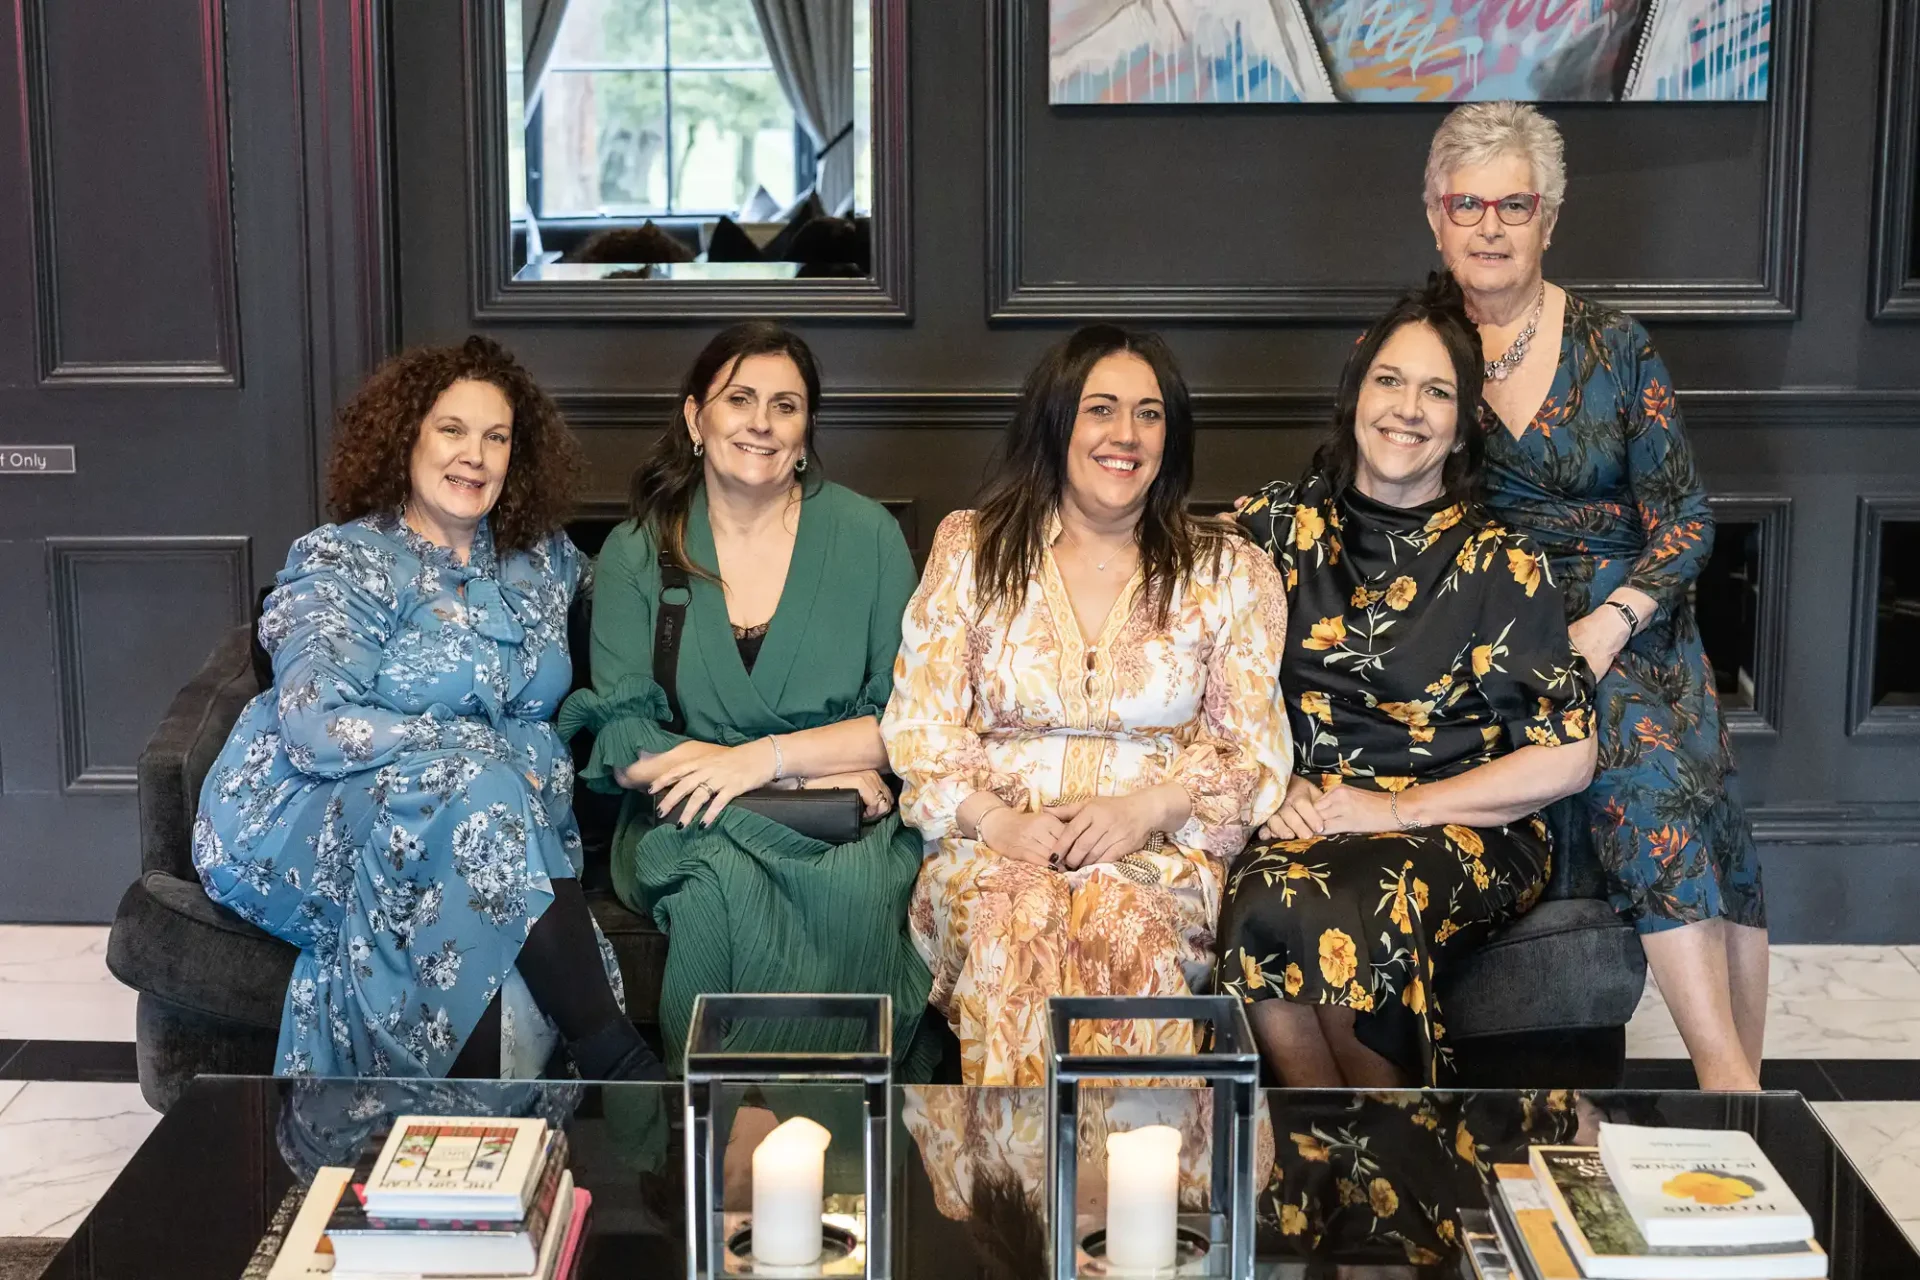 Five women smiling, seated on a sofa in a stylish room with artworks and a coffee table decorated with books and candles.